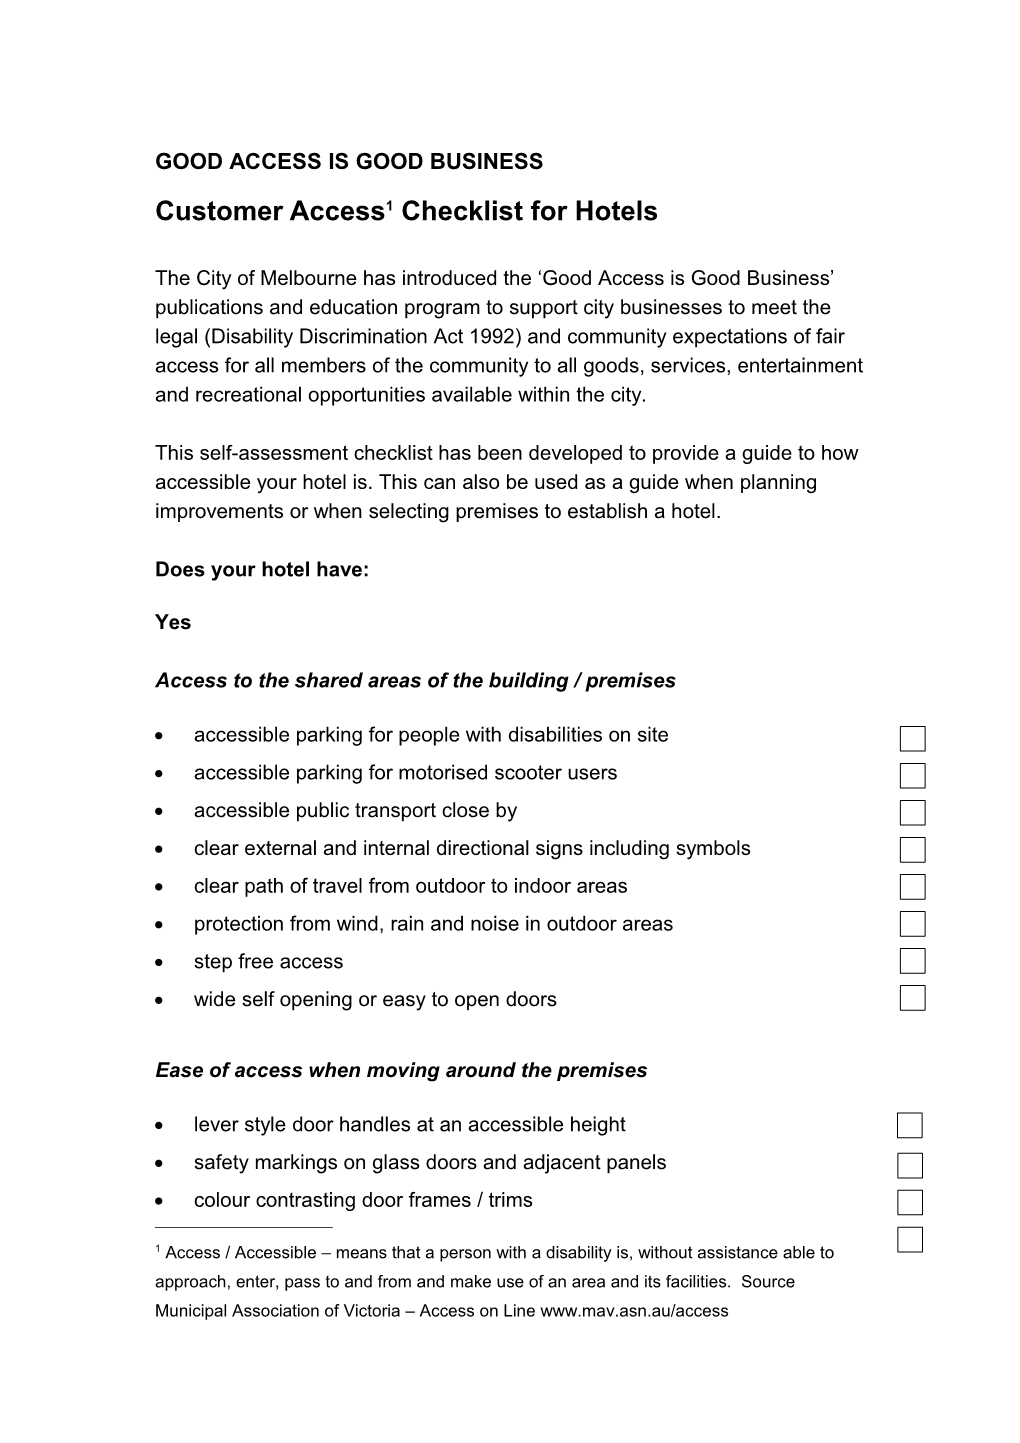 Customer Access Checklist for Hotels